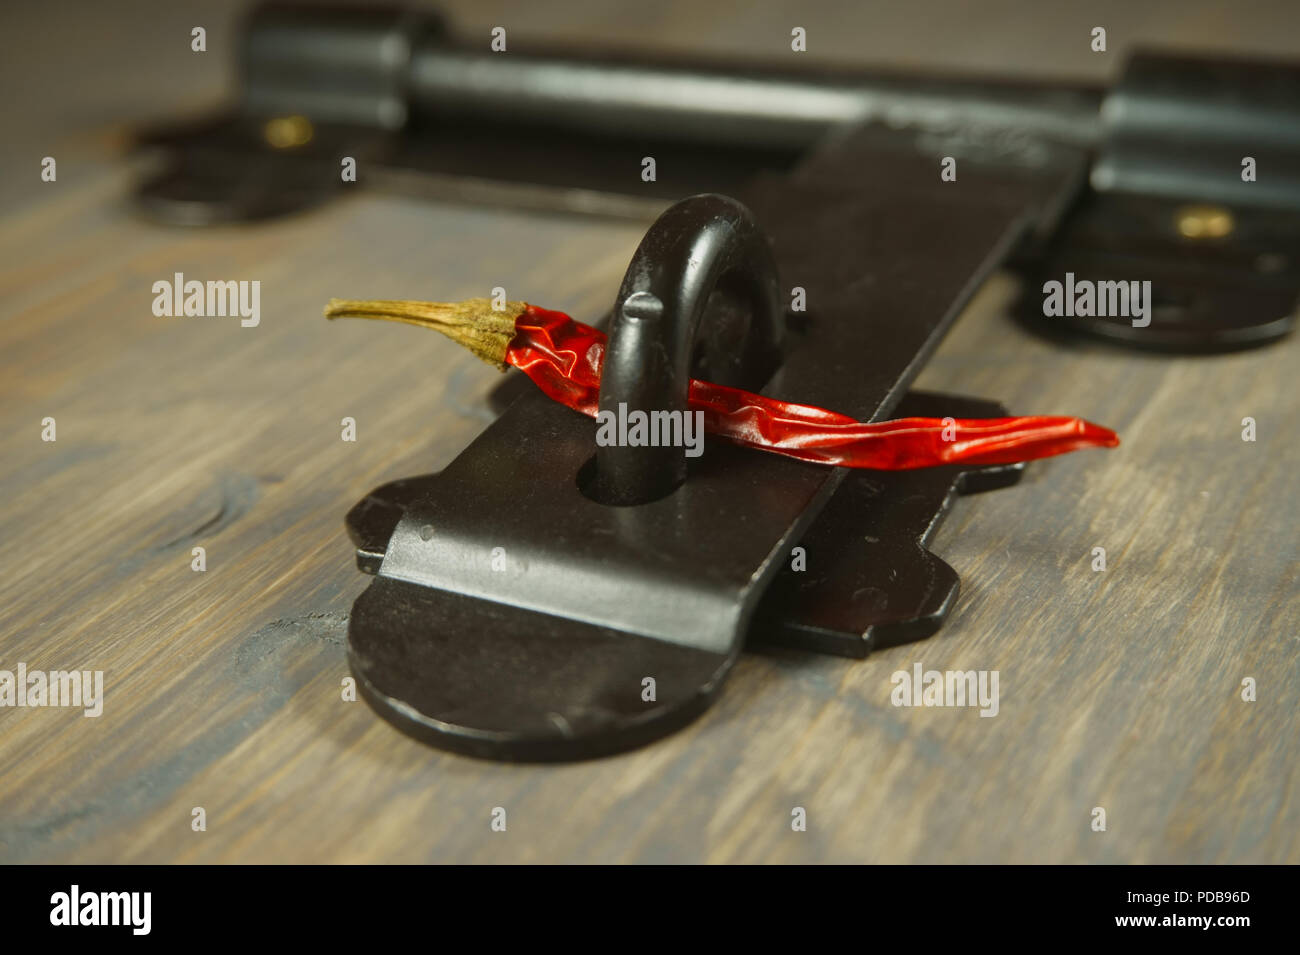 Old metal hasp and staple lock with a red hot chili pepper threaded through it in a conceptual image on a wood background Stock Photo